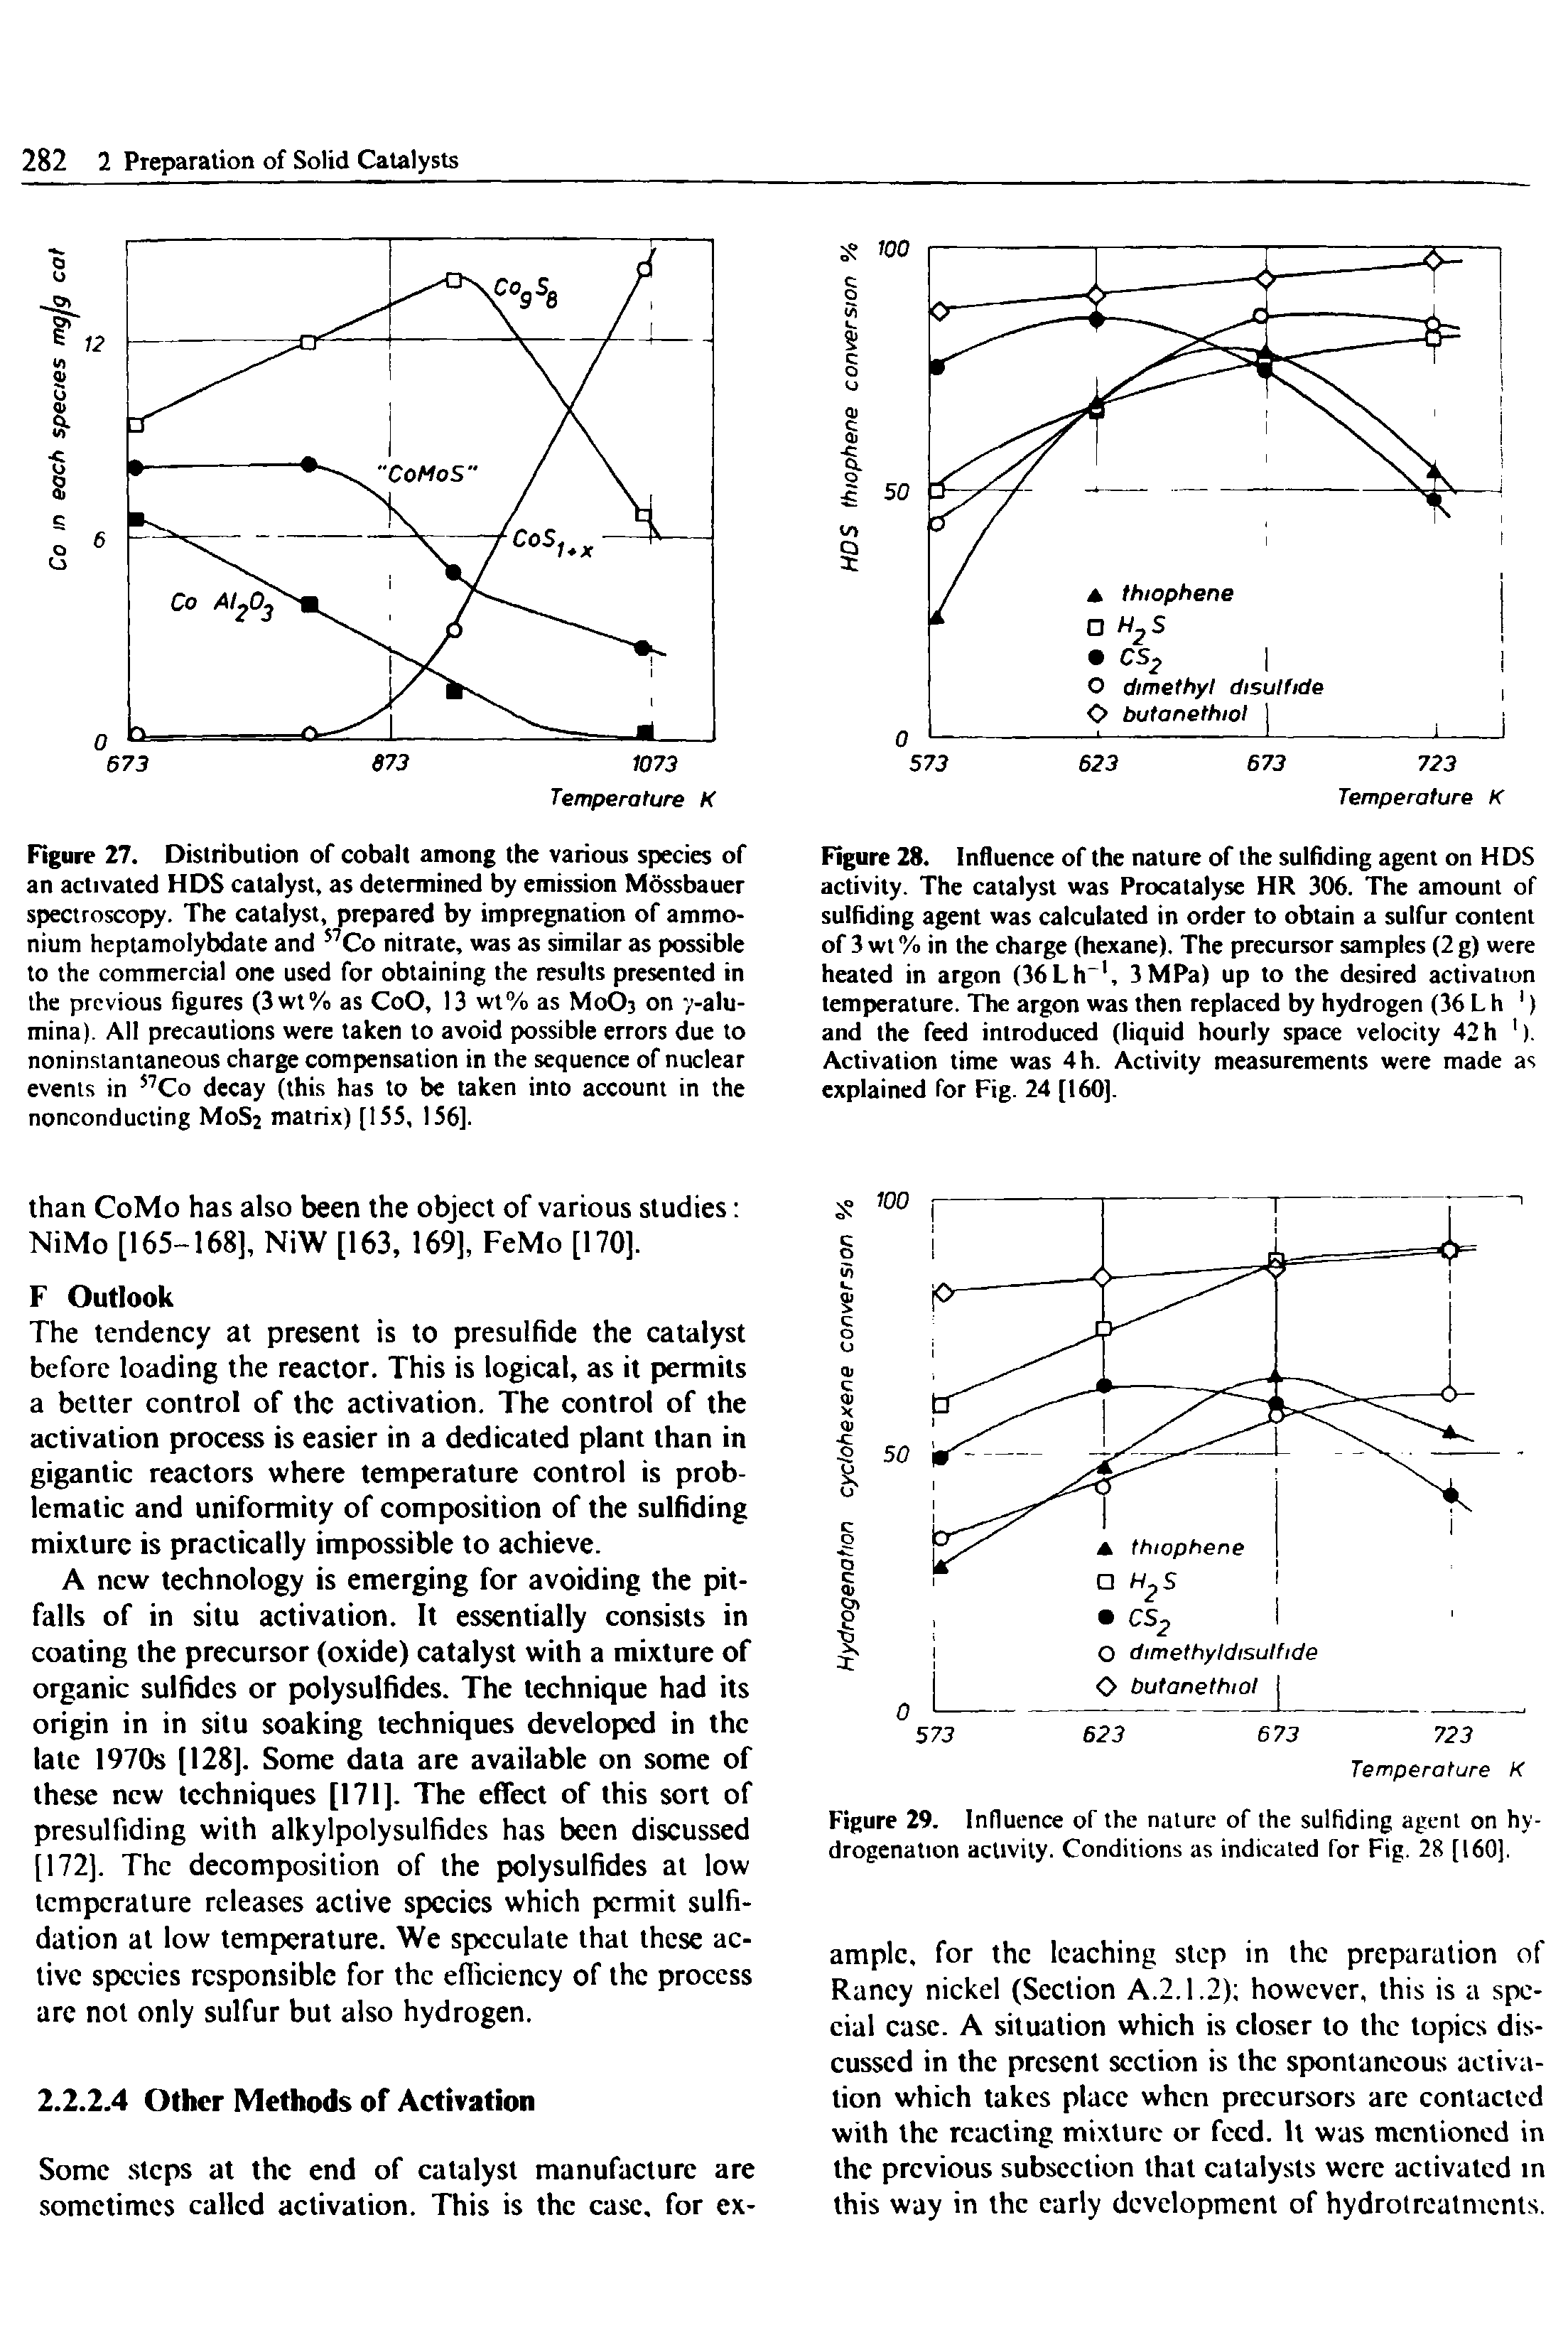 Figure 27. Distribution of cobalt among the various species of an activated HDS catalyst, as determined by emission Mossbauer spectroscopy. The catalyst, prepared by impregnation of ammonium heptamolybdate and 57Co nitrate, was as similar as possible to the commercial one used for obtaining the results presented in the previous figures (3wt% as CoO, 13 wt% as M0O3 on -/-alumina). All precautions were taken to avoid possible errors due to noninstantaneous charge compensation in the sequence of nuclear events in 57Co decay (this has to be taken into account in the nonconducting M0S2 matrix) [155, 156].